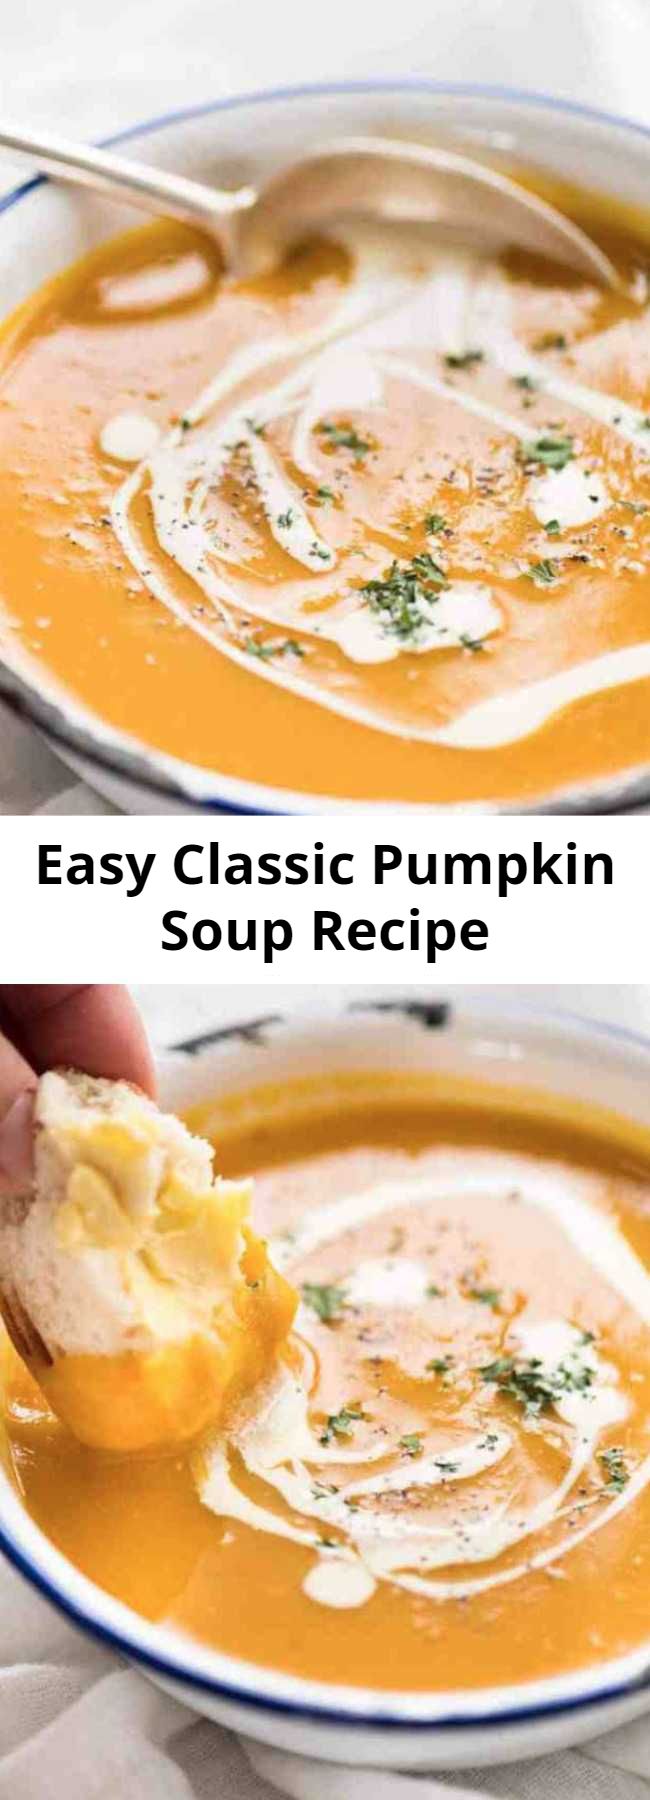 Easy Classic Pumpkin Soup Recipe - This is a classic, easy pumpkin soup made with fresh pumpkin that is very fast to make. Thick, creamy and full of flavour, this is THE pumpkin soup recipe you will make now and forever!